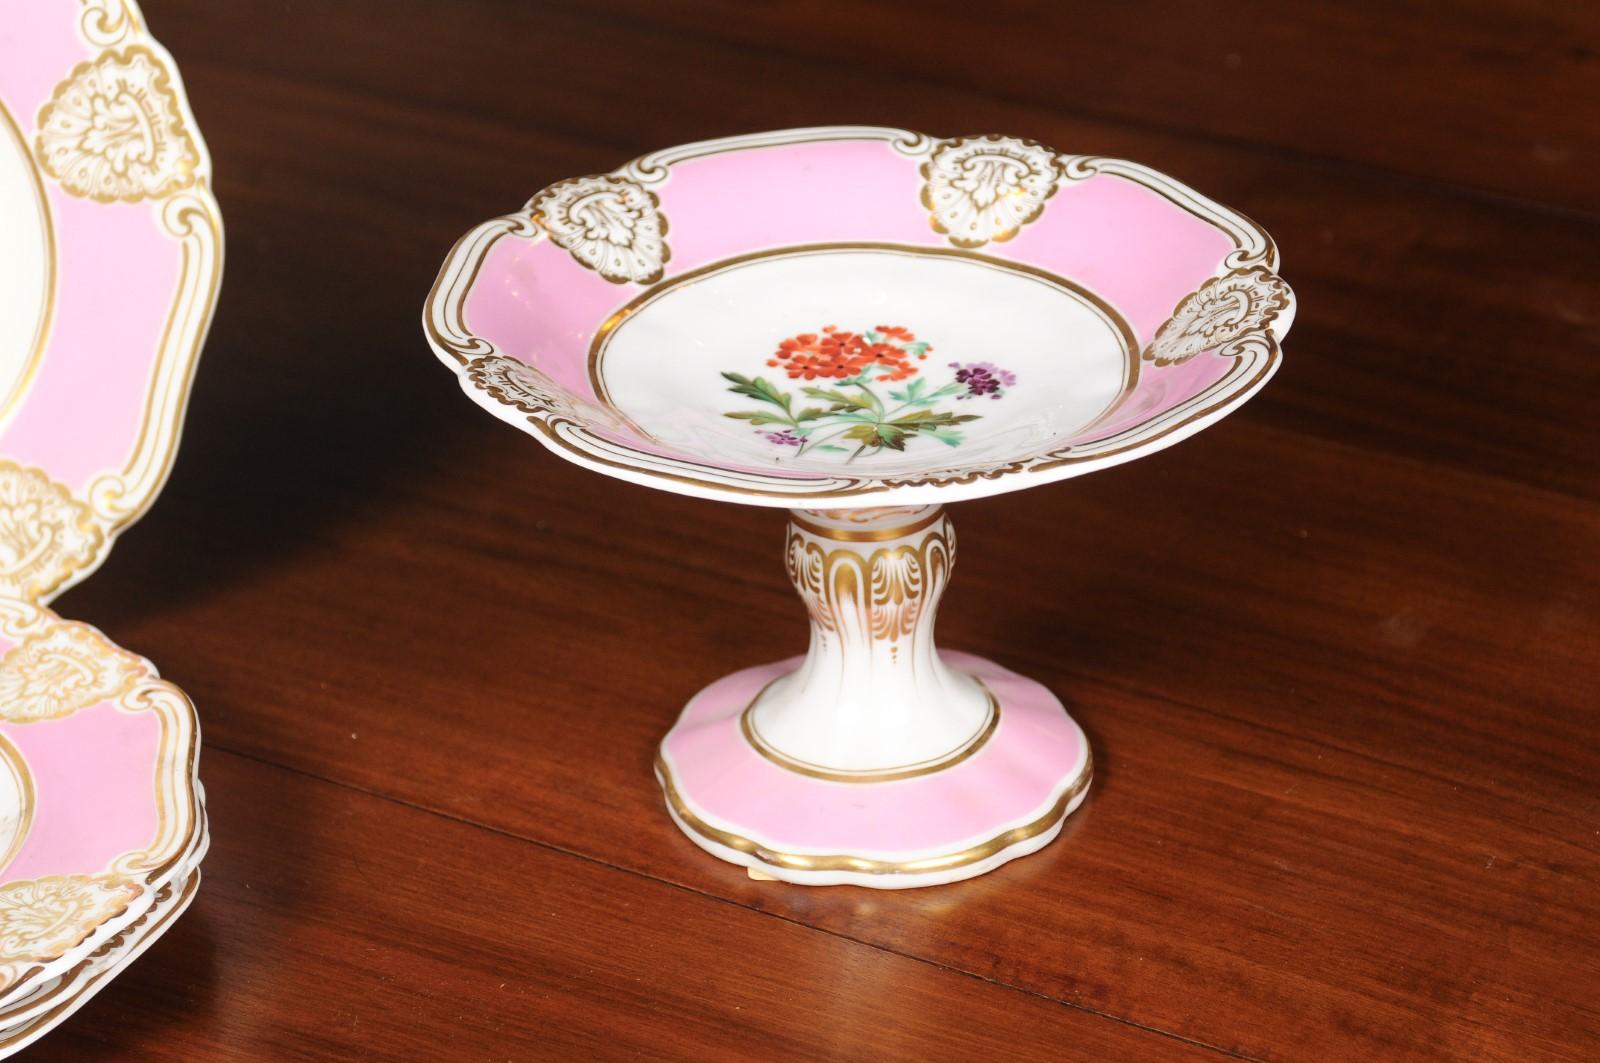 19th Century English Worcester Co. George Grainger Pink, White and Gilt Compotes